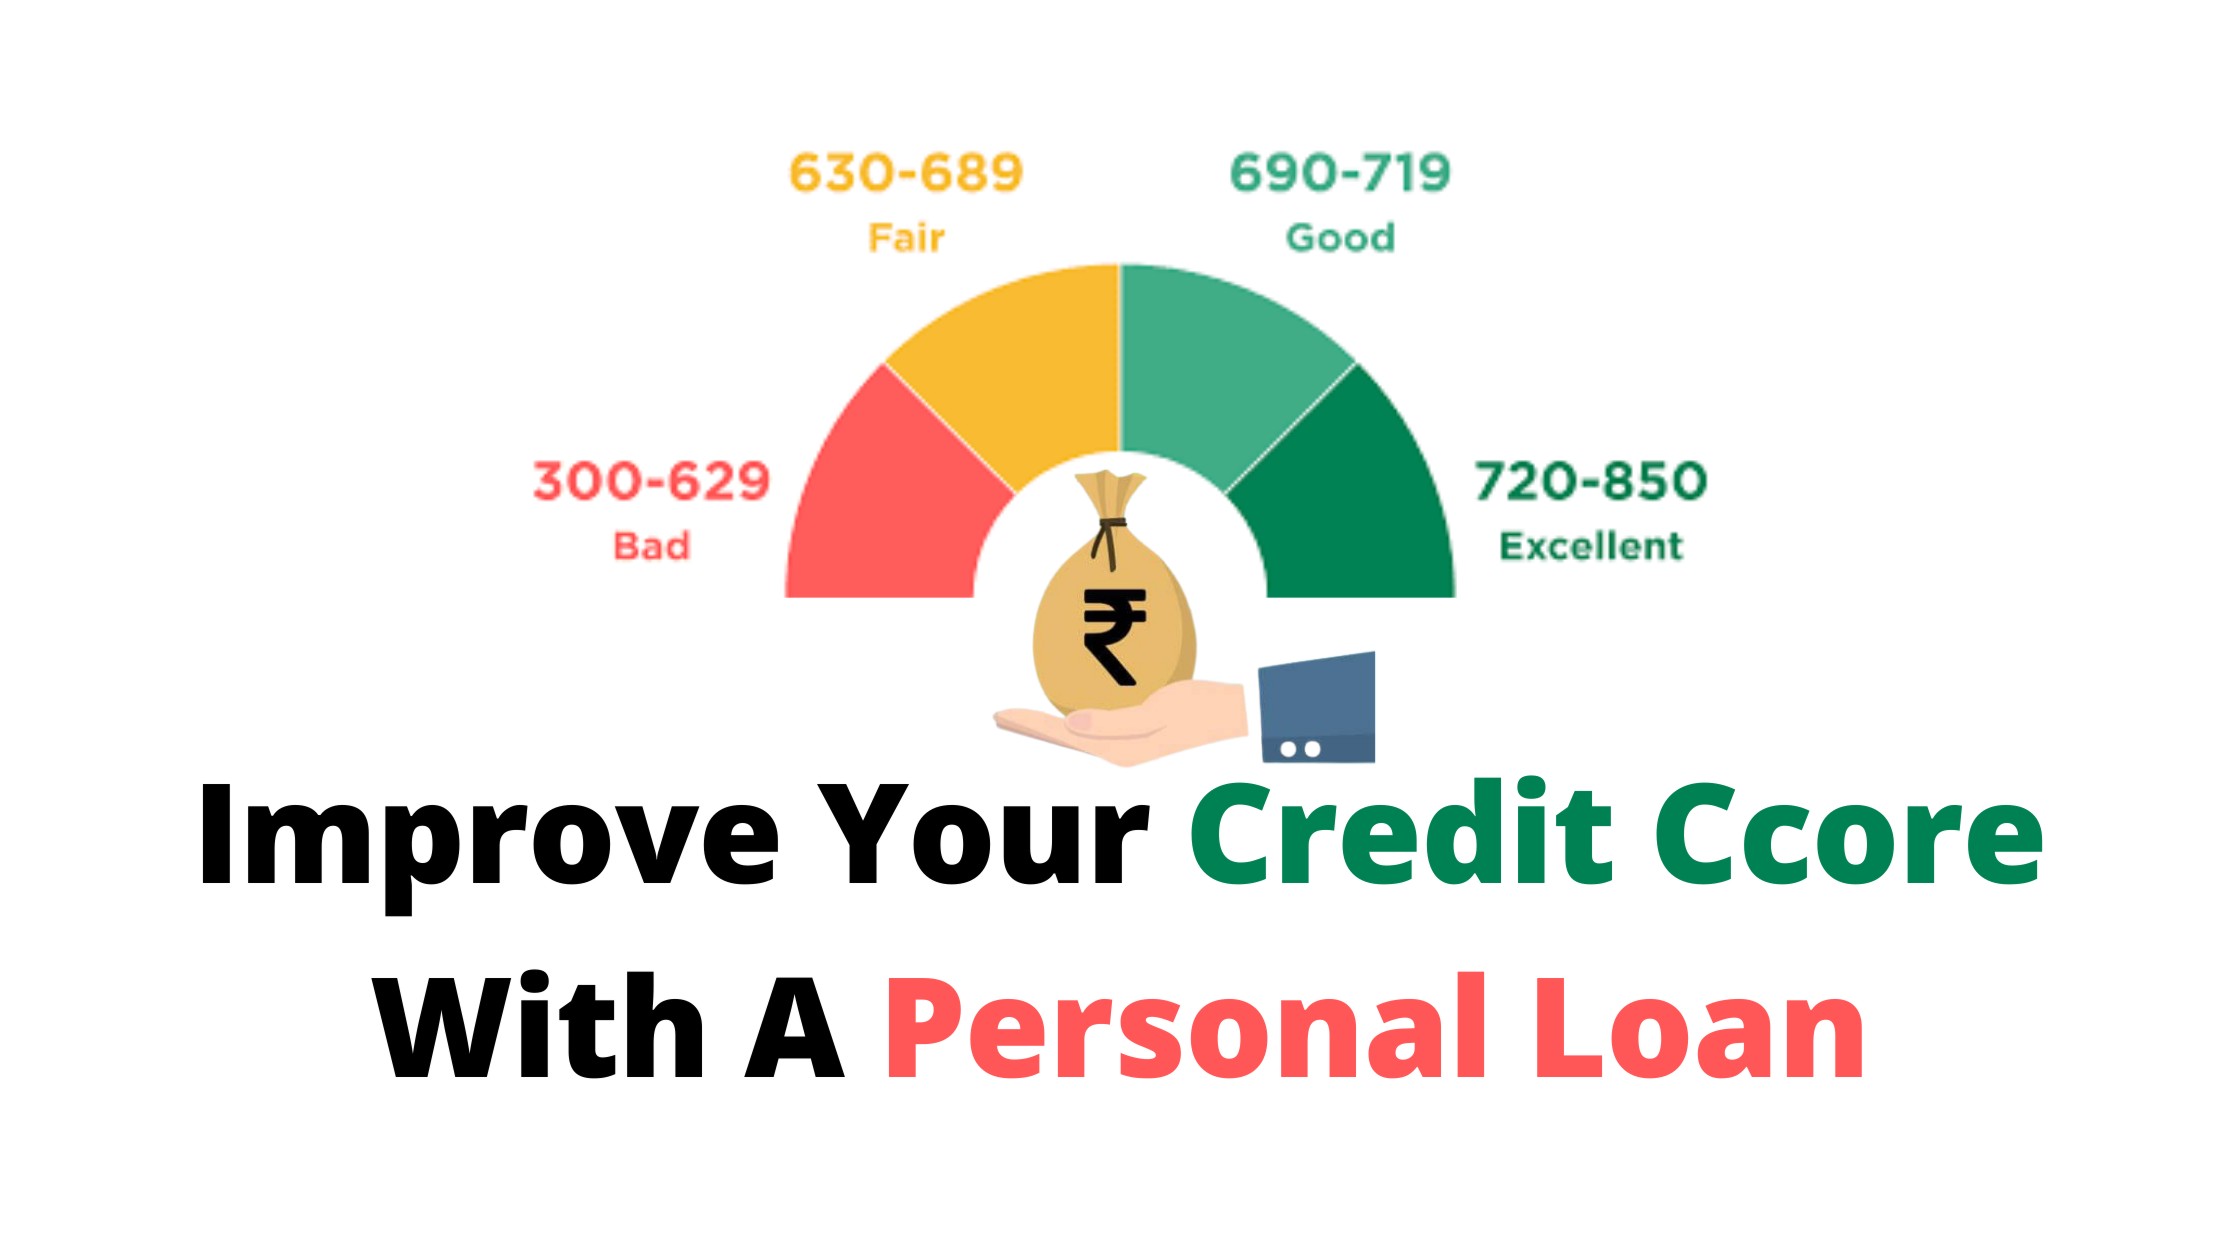 How to improve your credit score with a personal loan